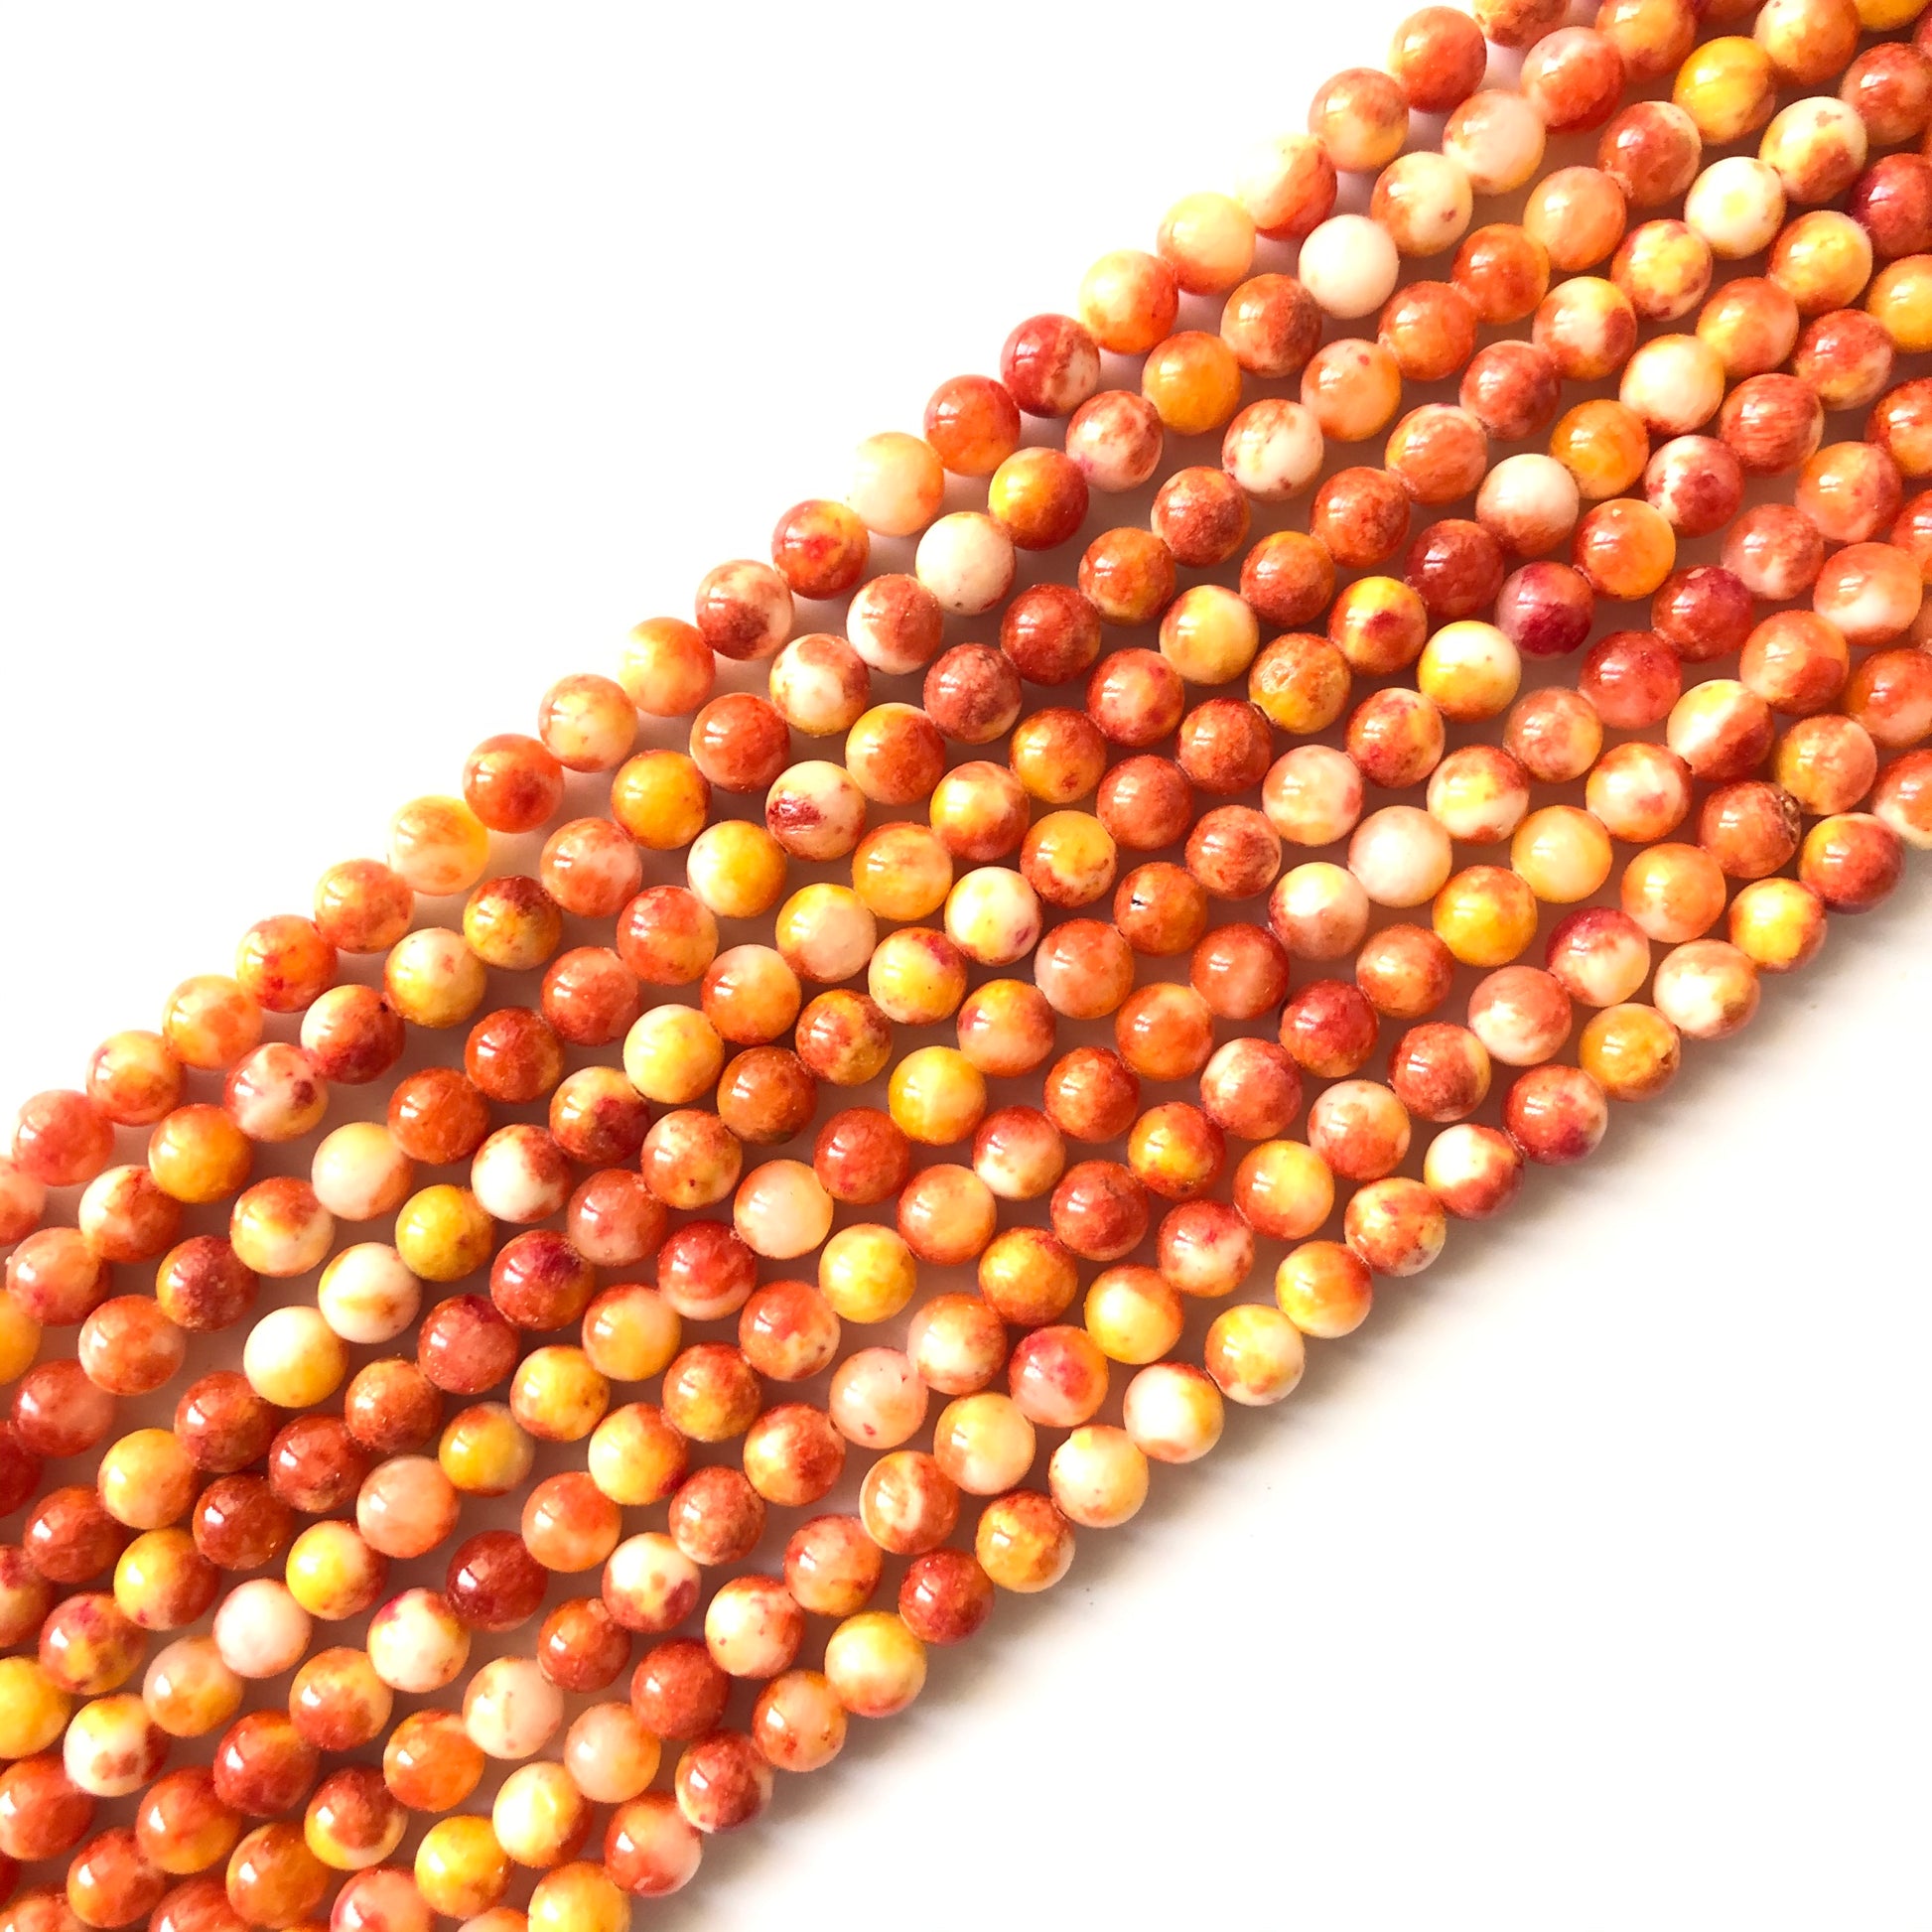 2 Strands/lot 8mm, 10mm Natural Red Yellow Persian Jade Round Stone Beads Stone Beads 8mm Stone Beads Persian Jade Beads Round Jade Beads Charms Beads Beyond